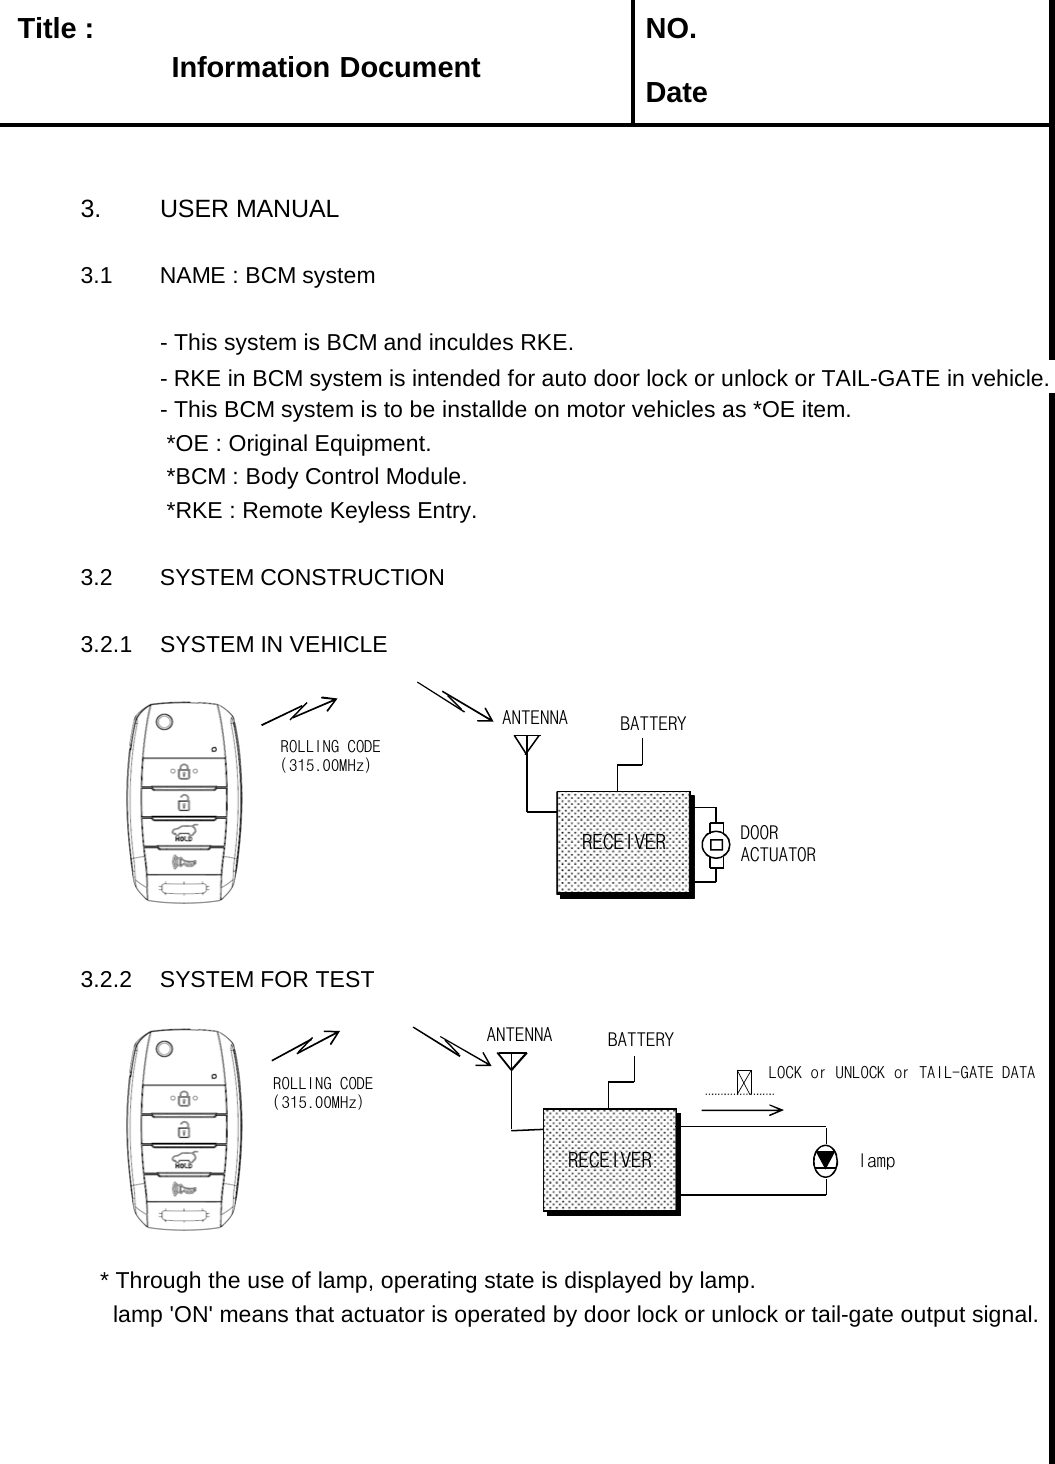   Title :  NO. Date3. USER MANUAL3.1 NAME : BCM system- This system is BCM and inculdes RKE.  - RKE in BCM system is intended for auto door lock or unlock or TAIL-GATE in vehicle. - This BCM system is to be installde on motor vehicles as *OE item. *OE : Original Equipment. *BCM : Body Control Module. *RKE : Remote Keyless Entry.3.2 SYSTEM CONSTRUCTION3.2.1 SYSTEM IN VEHICLE3.2.2 SYSTEM FOR TEST    * Through the use of lamp, operating state is displayed by lamp.     lamp &apos;ON&apos; means that actuator is operated by door lock or unlock or tail-gate output signal. Information DocumentInformation DocumentInformation DocumentInformation DocumentANTENNAROLLING CODE(315.00MHz)ANTENNARECEIVERBATTERYlampROLLING CODE(315.00MHz)LOCK or UNLOCK or TAIL-GATE DATABATTERYDOOR ACTUATORRECEIVER